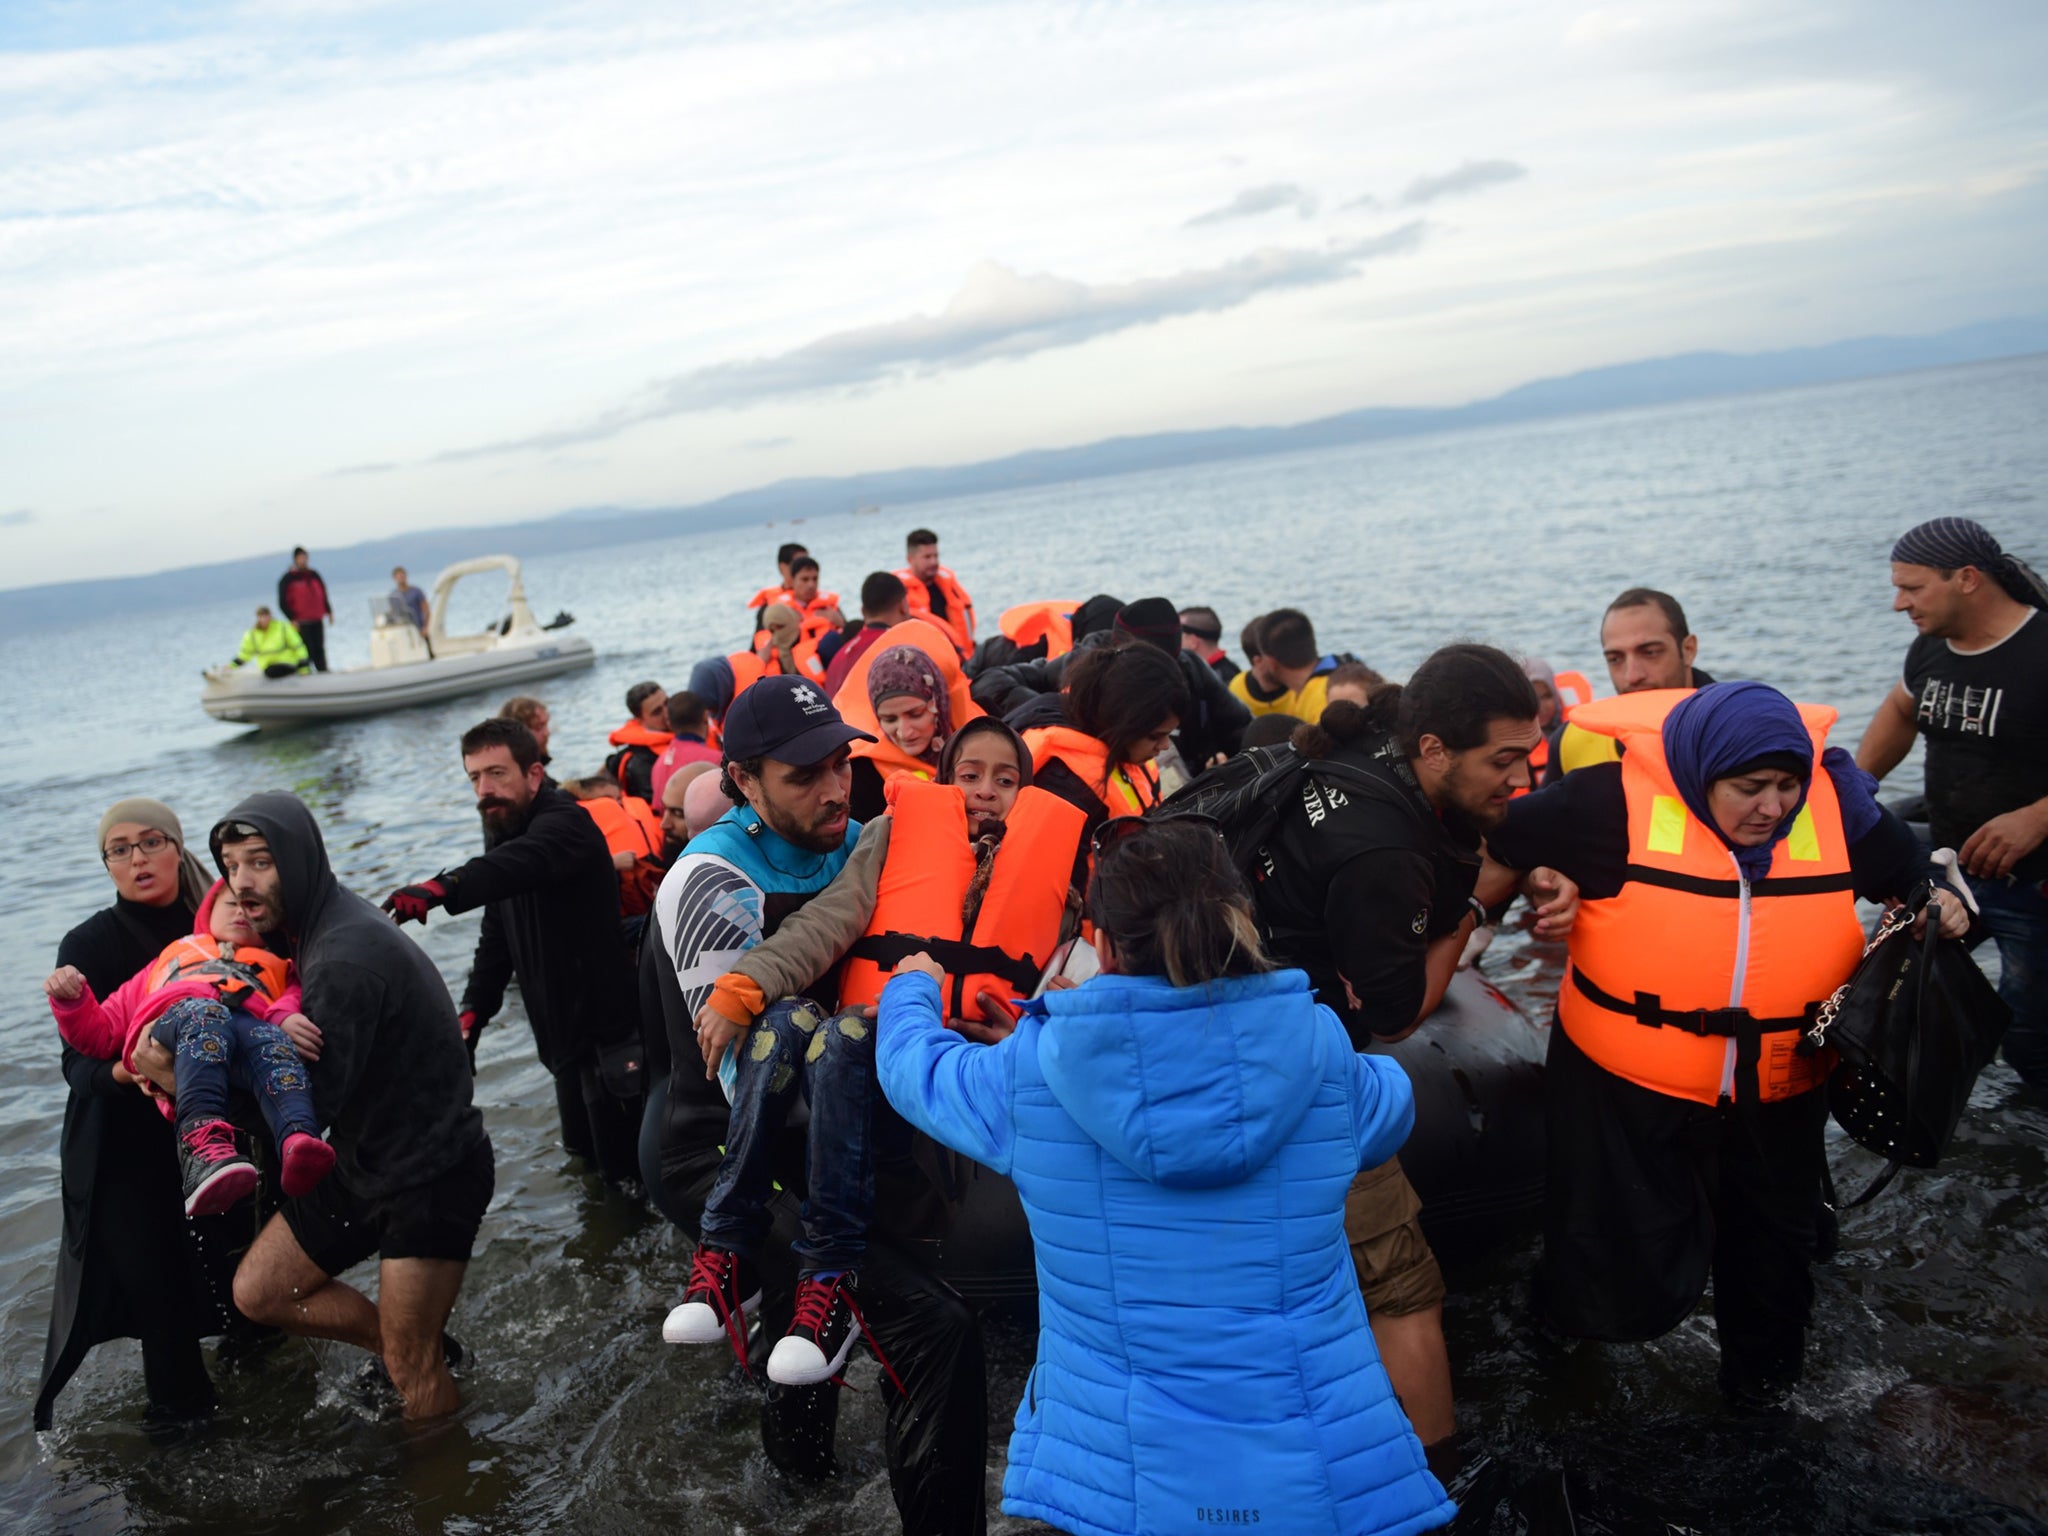 Greek islanders have been rescuing refugees from the sea